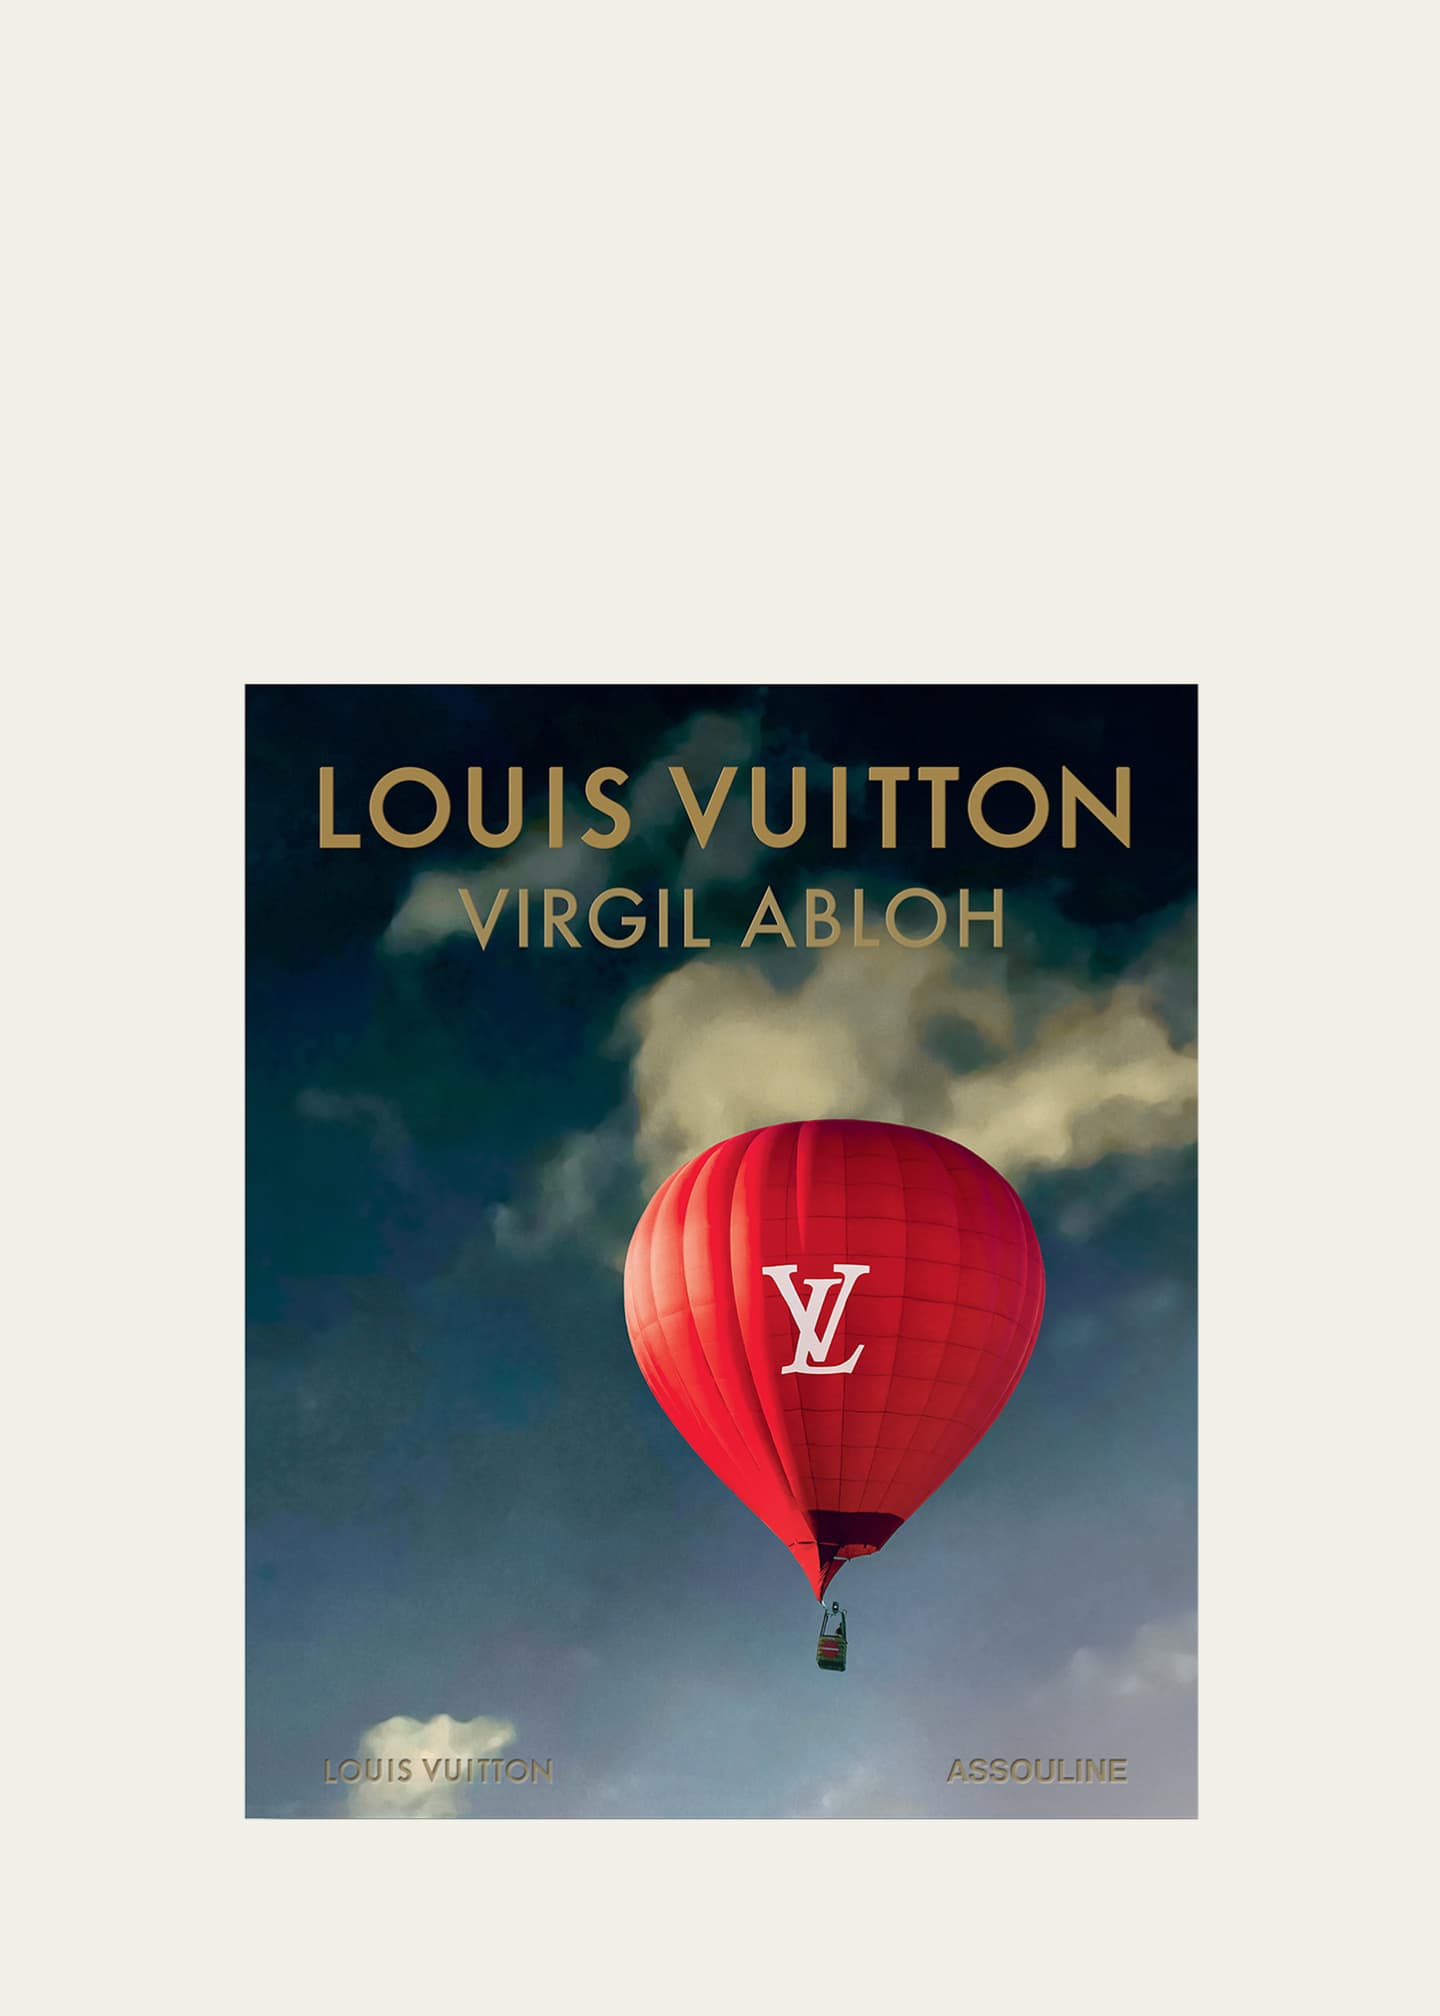 Louis Vuitton: Virgil Abloh by Madsen, Anders Christian